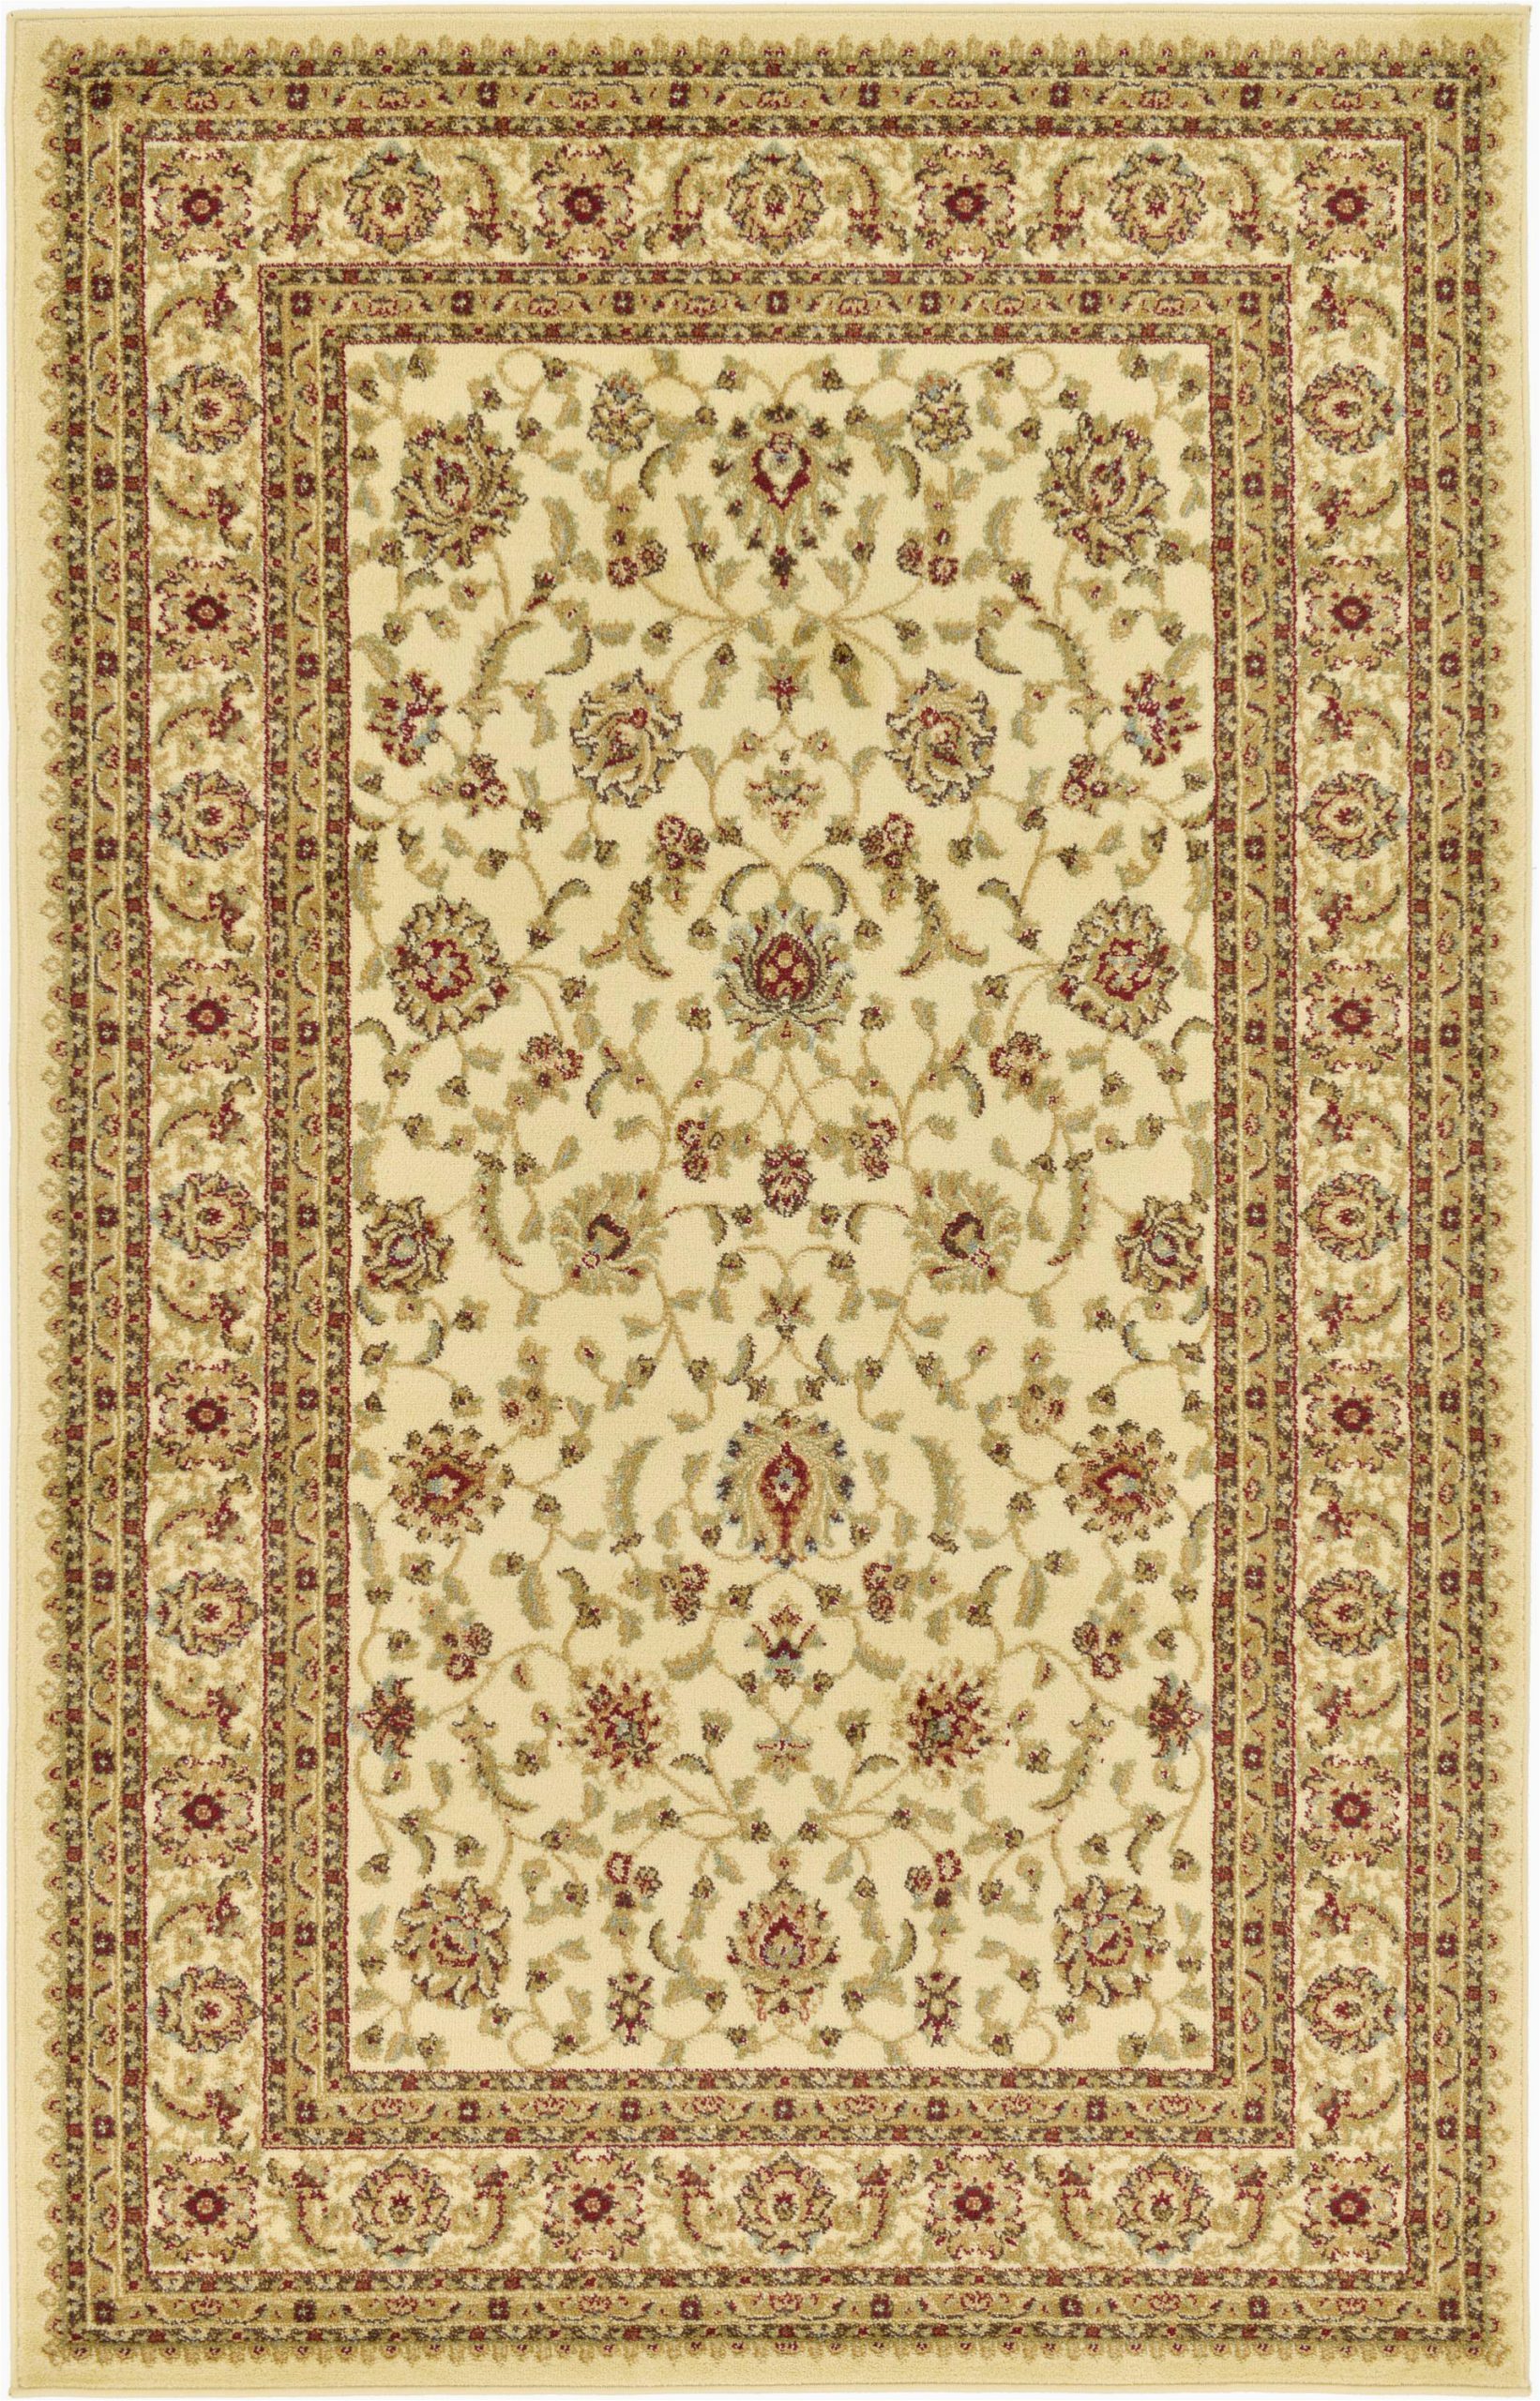 Better Homes and Gardens area Rugs at Walmart Better Homes & Gardens Daxton Medallion area Rug